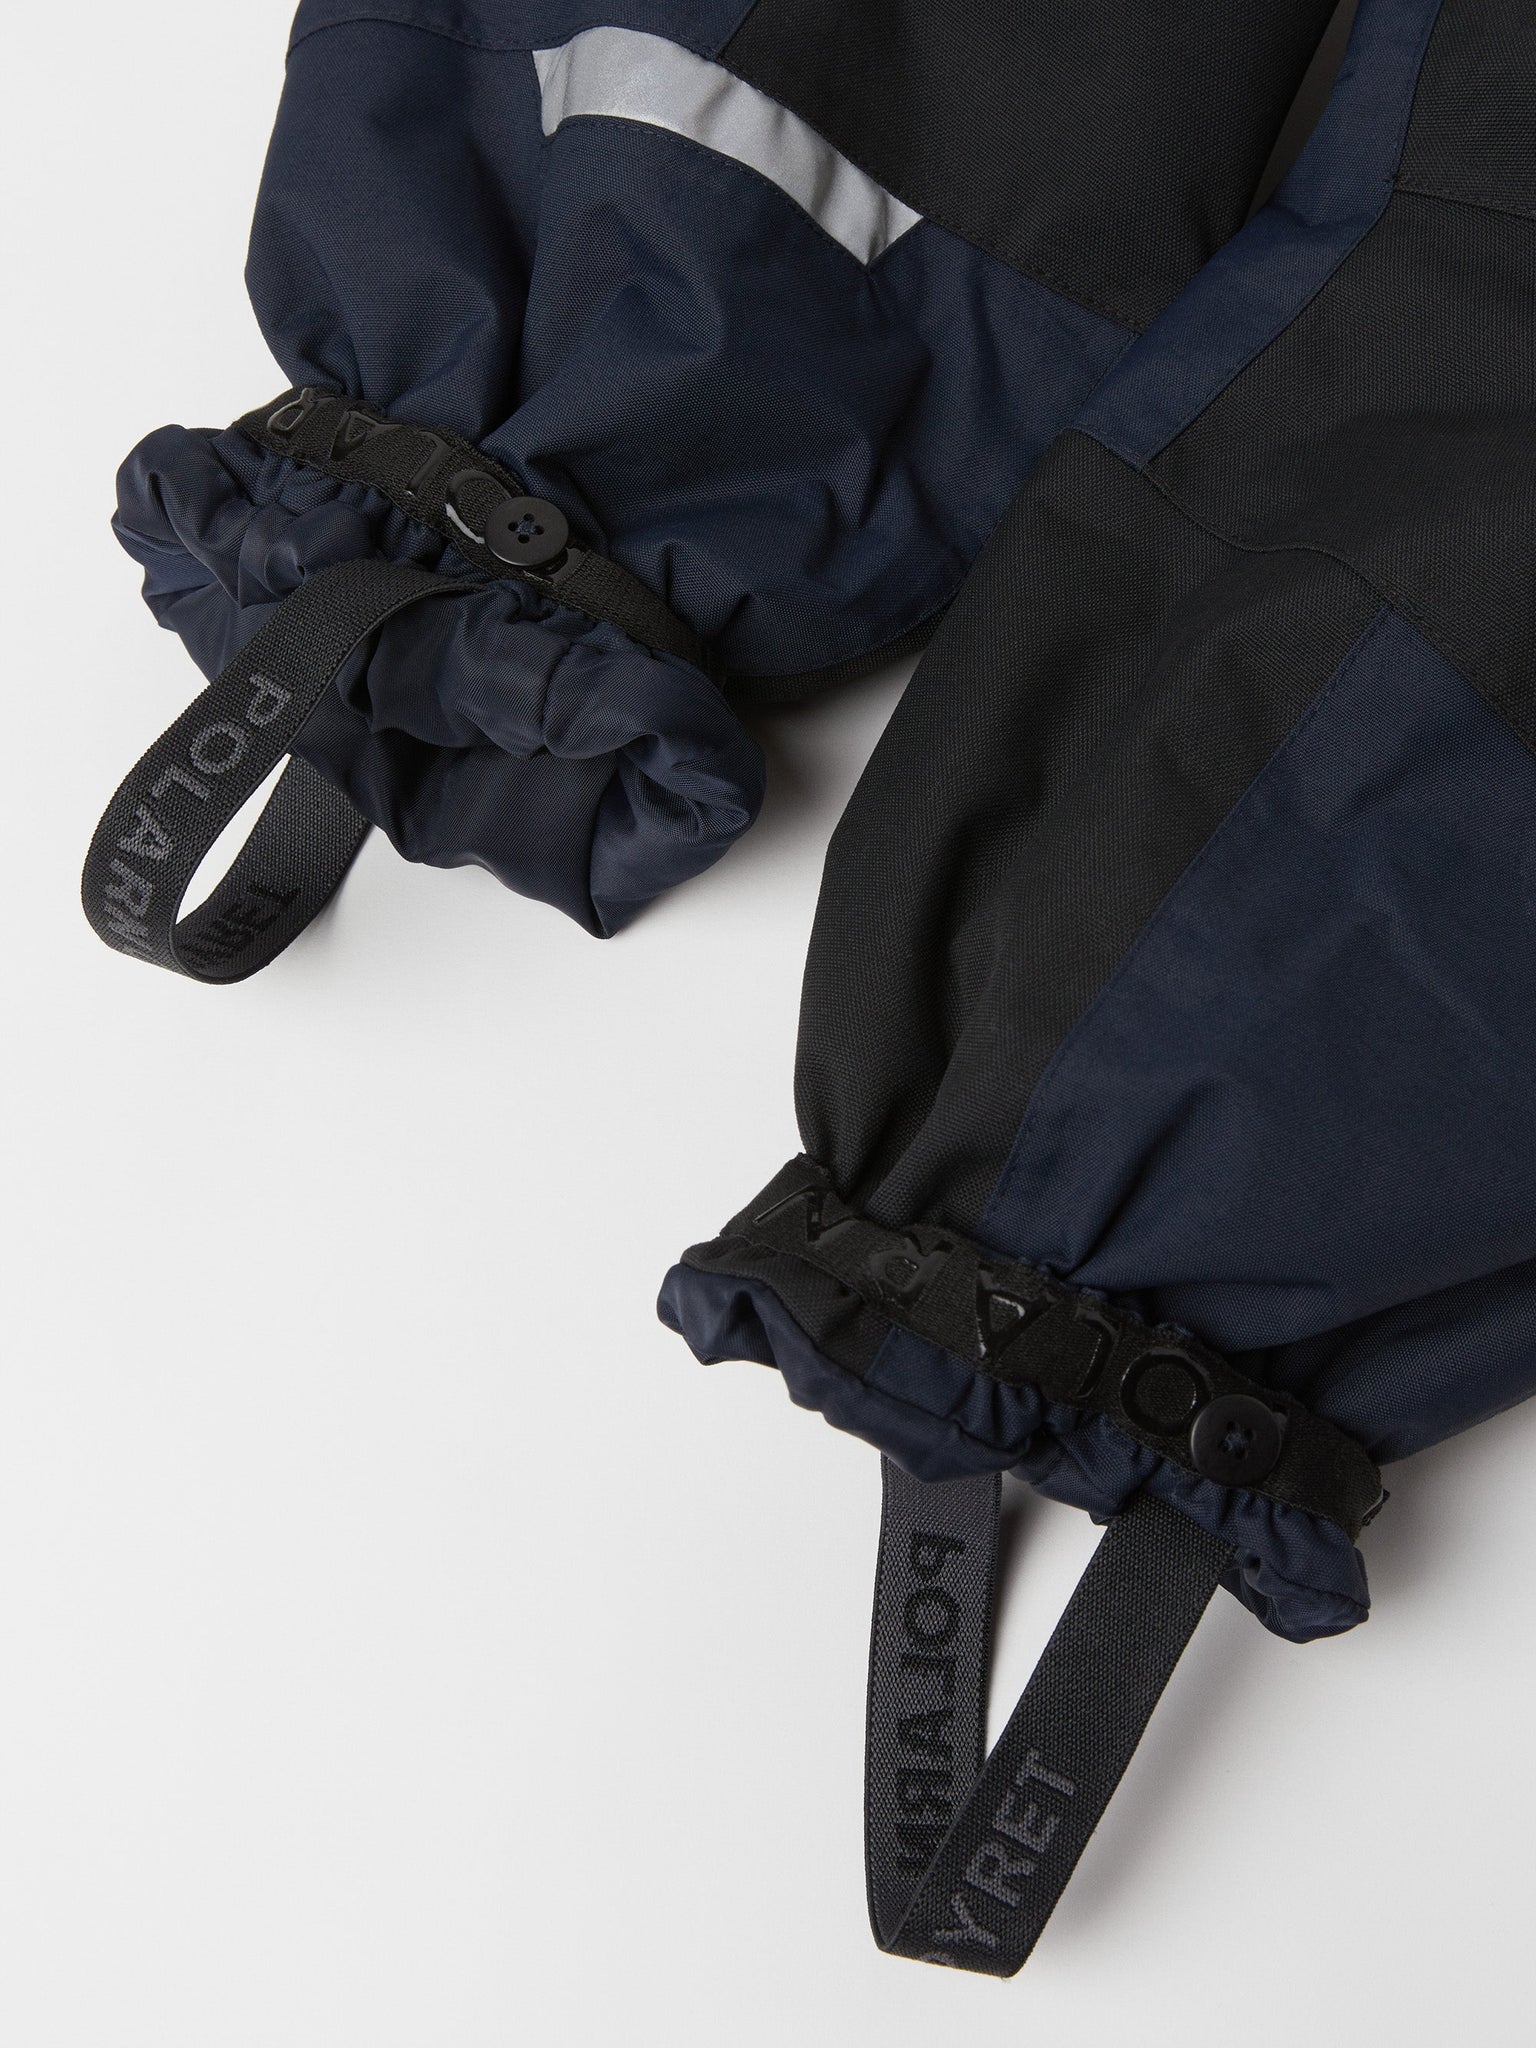 Navy Kids Padded Waterproof Salopettes from the Polarn O. Pyret outerwear collection. Quality kids clothing made to last.